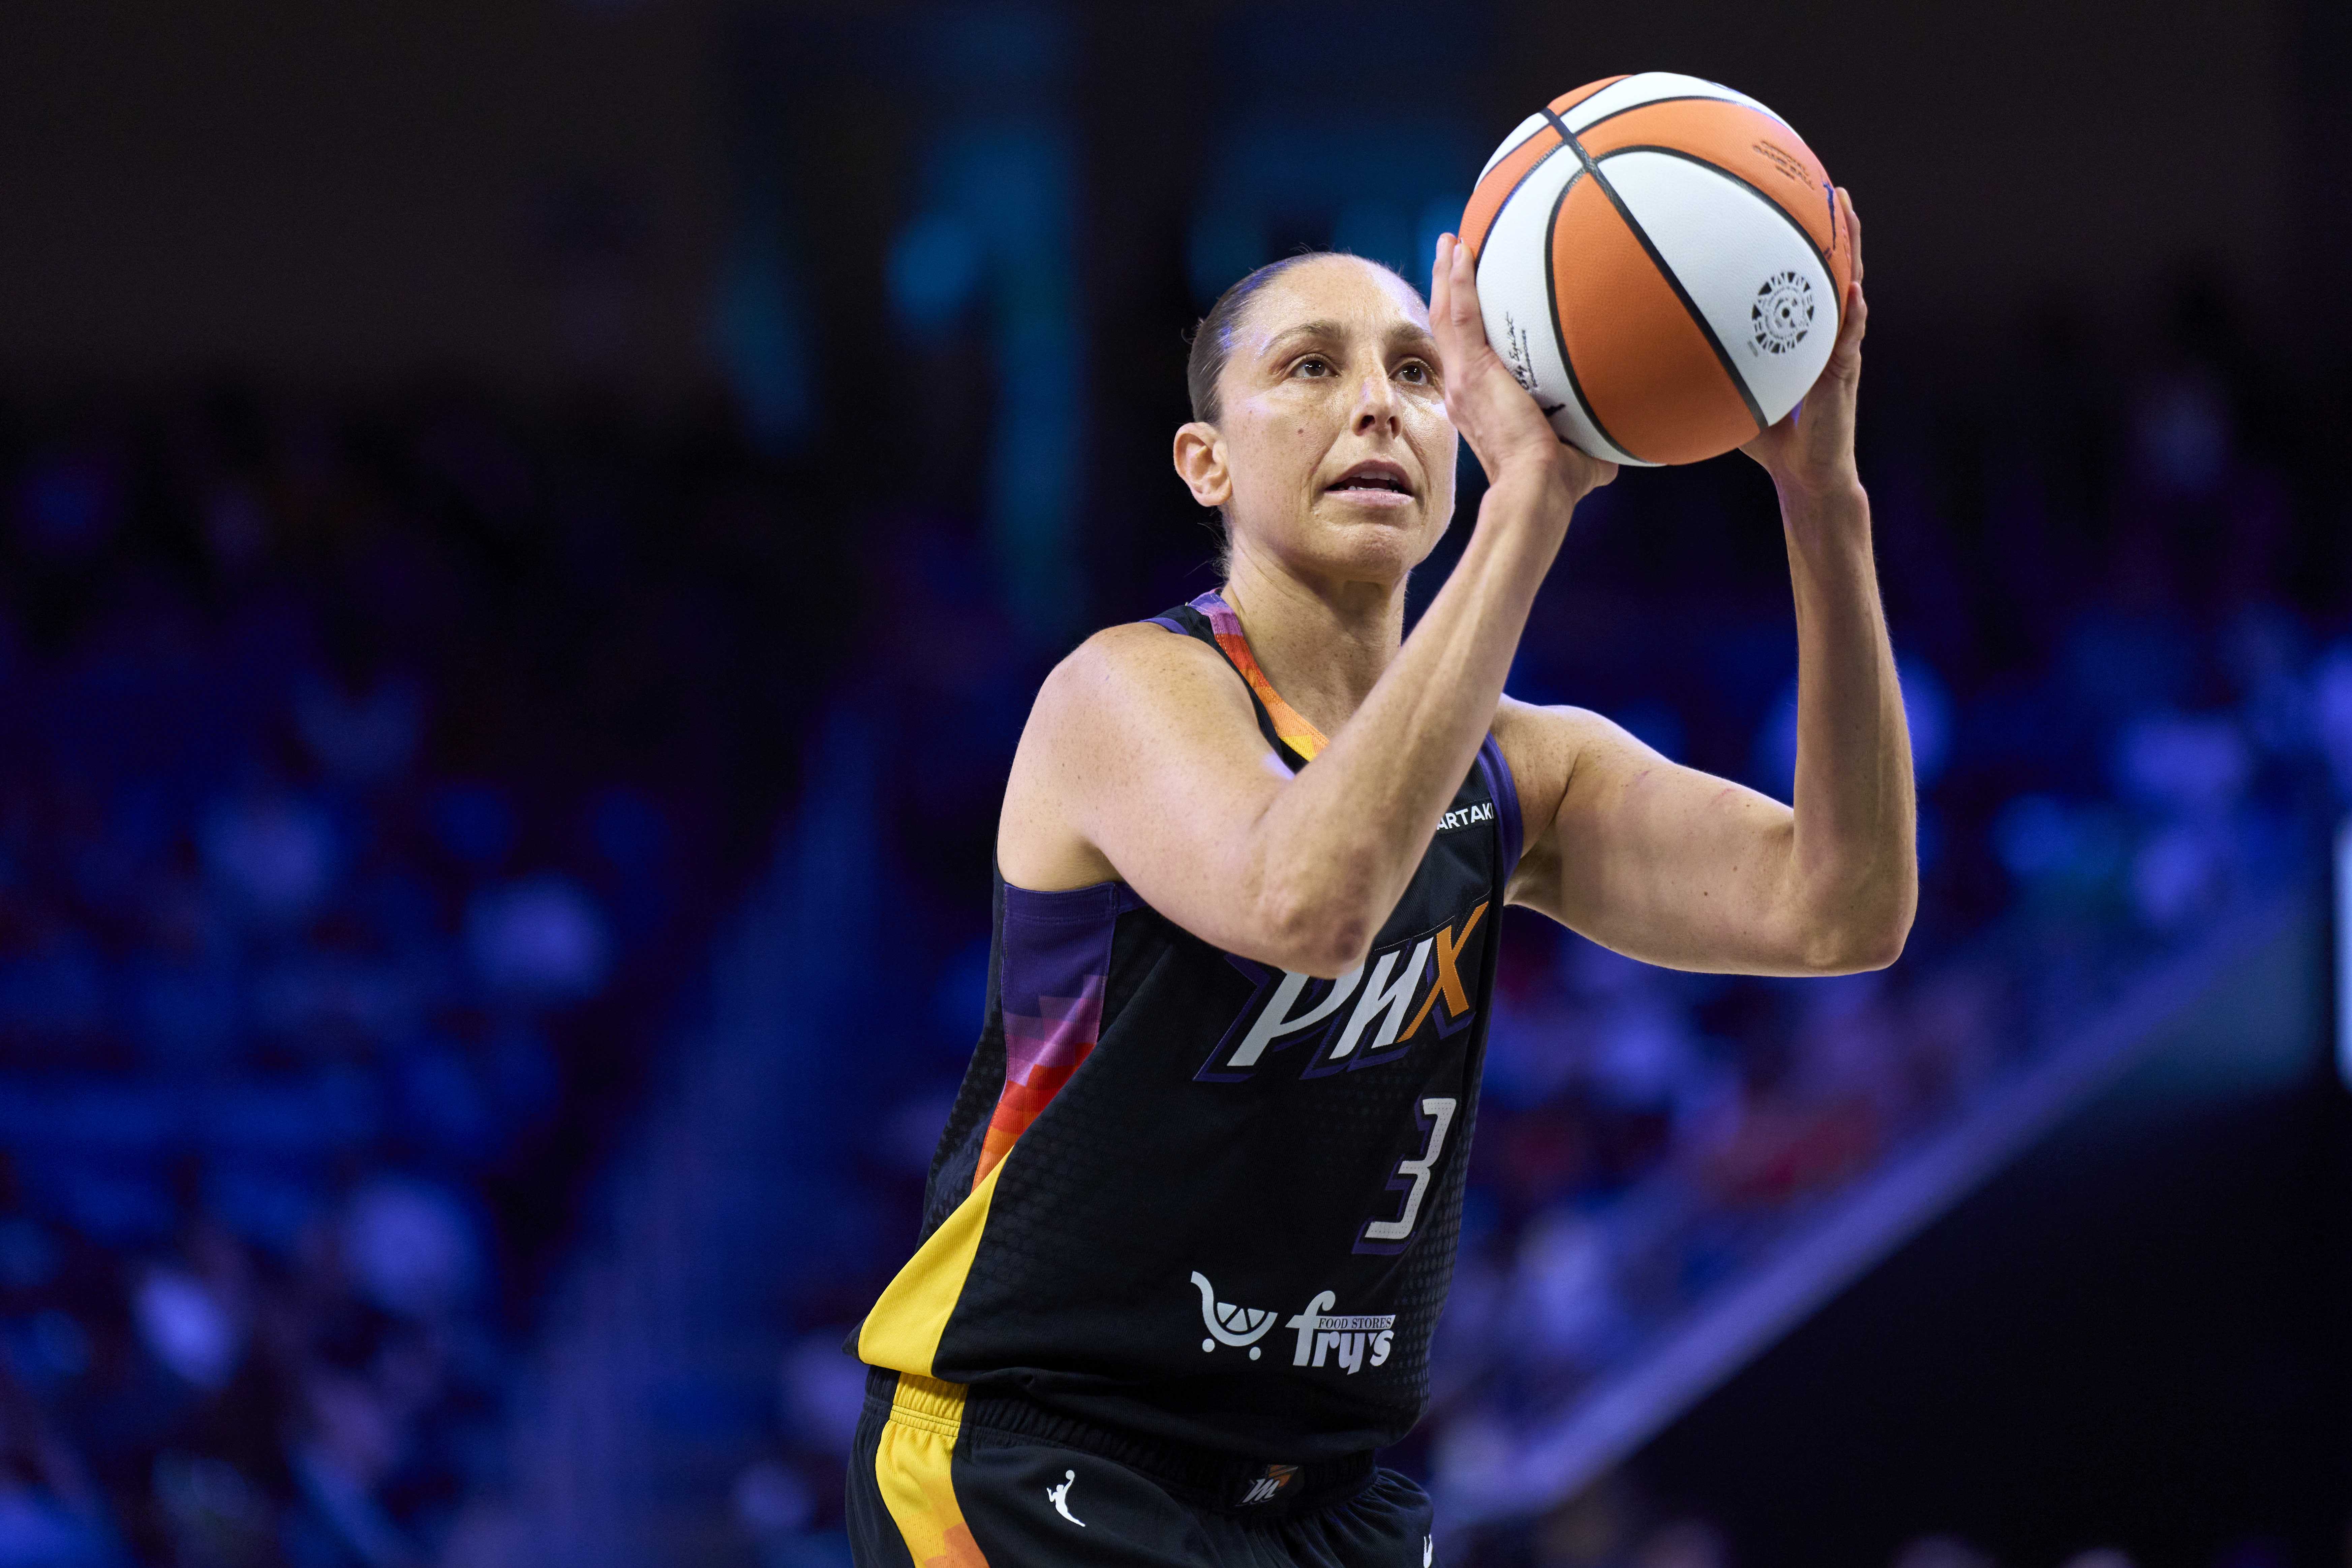 Phoenix Mercury to name courts after Diana Taurasi at new $70 million practice facility